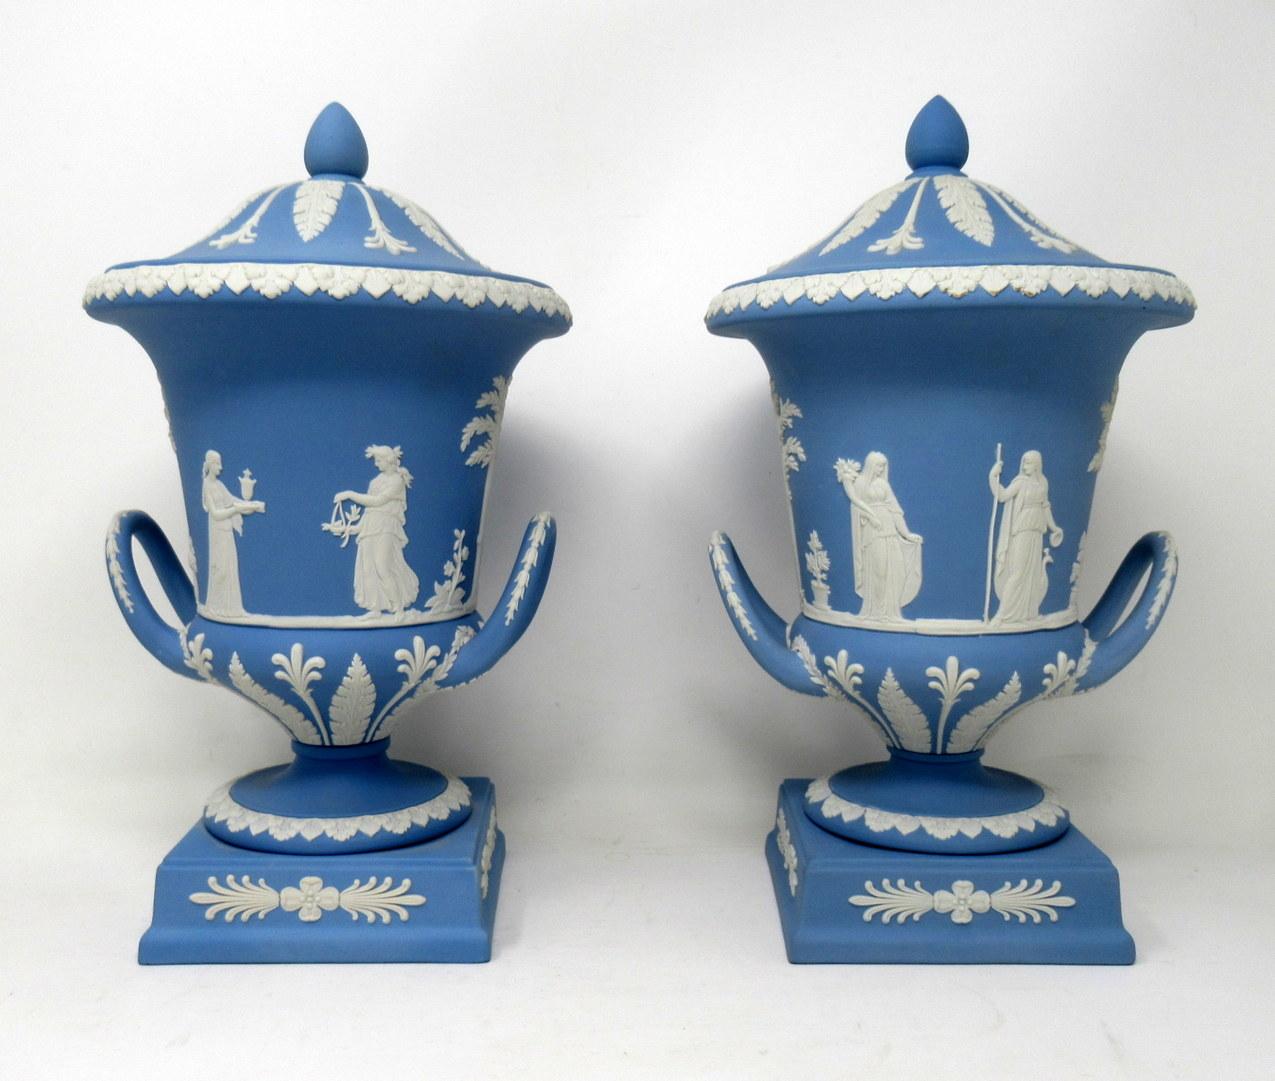 An exceptionally fine example of a pair of English Jasperware Wedgwood urns of good size proportions, mid-20th century.

The twin arched handle Campana form urn decorated in relief depicting neoclassical scenes of adult figures and children on